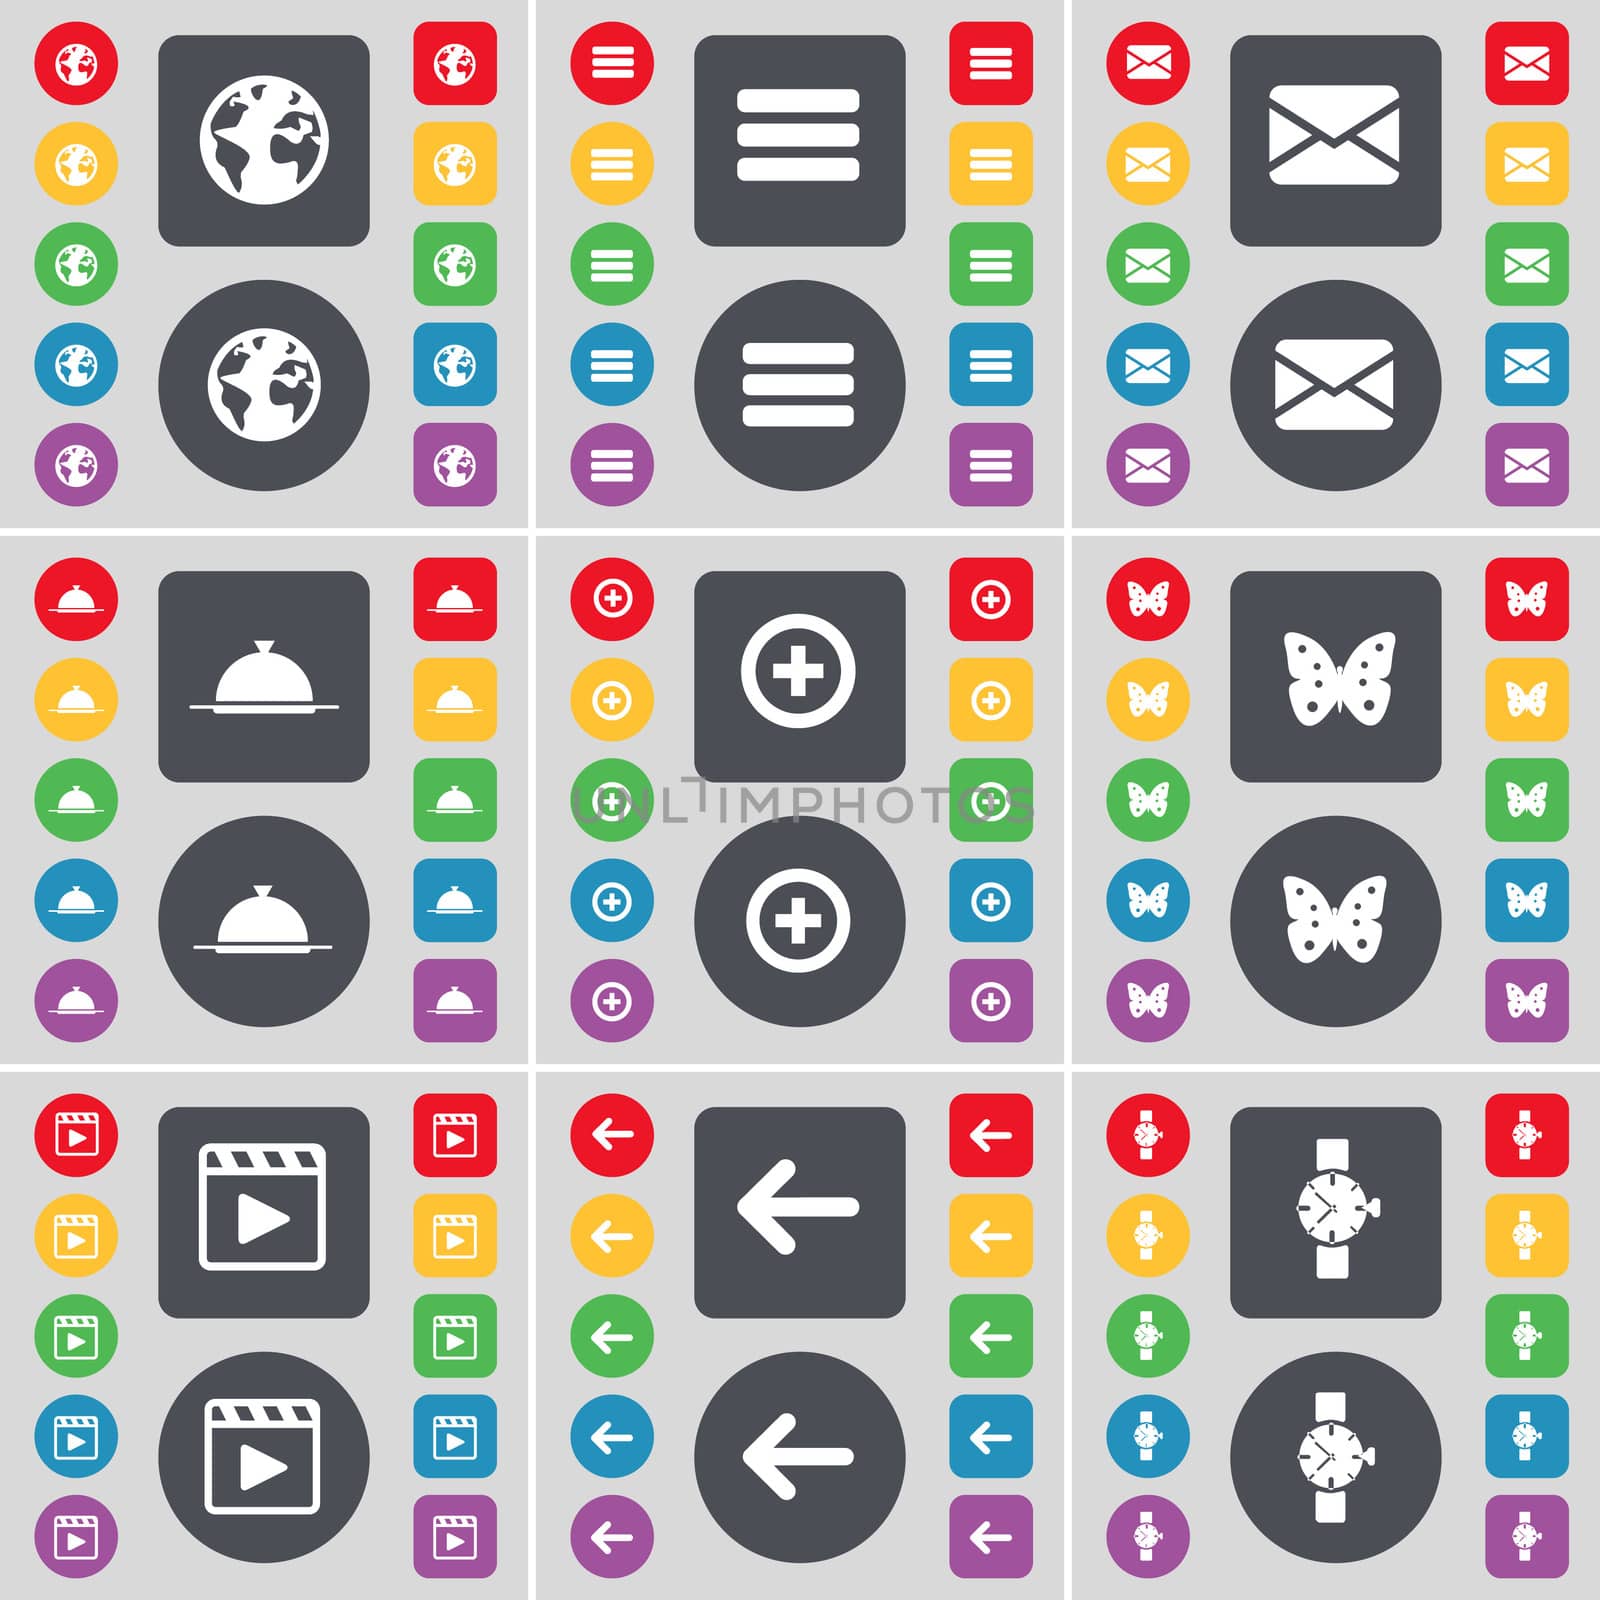 Earth, Apps, Message, Tray, Plus, Buttery, Media player, Arrow left, Wrist watch icon symbol. A large set of flat, colored buttons for your design.  by serhii_lohvyniuk